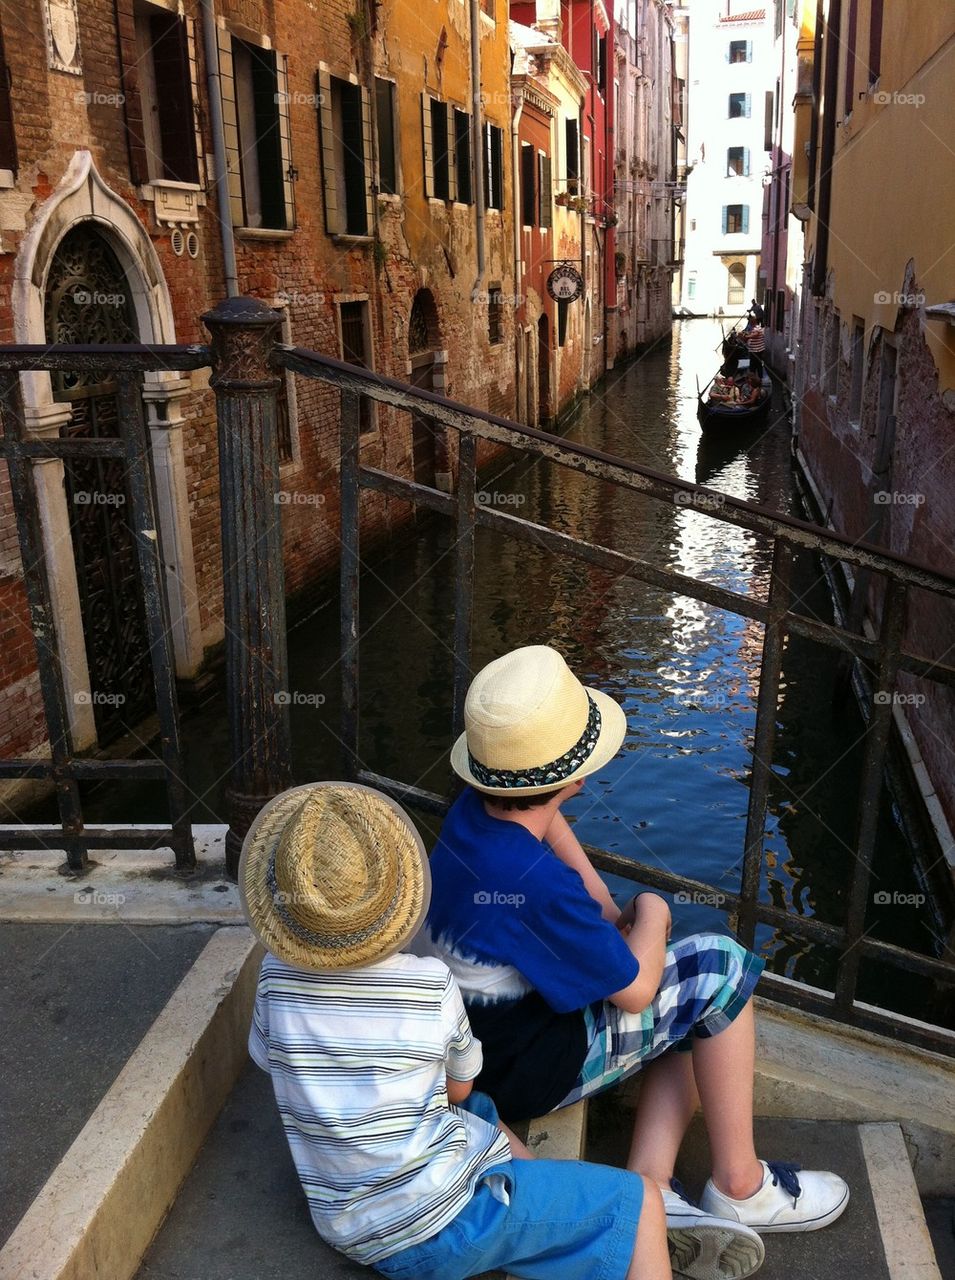 Watching the gondolas go by